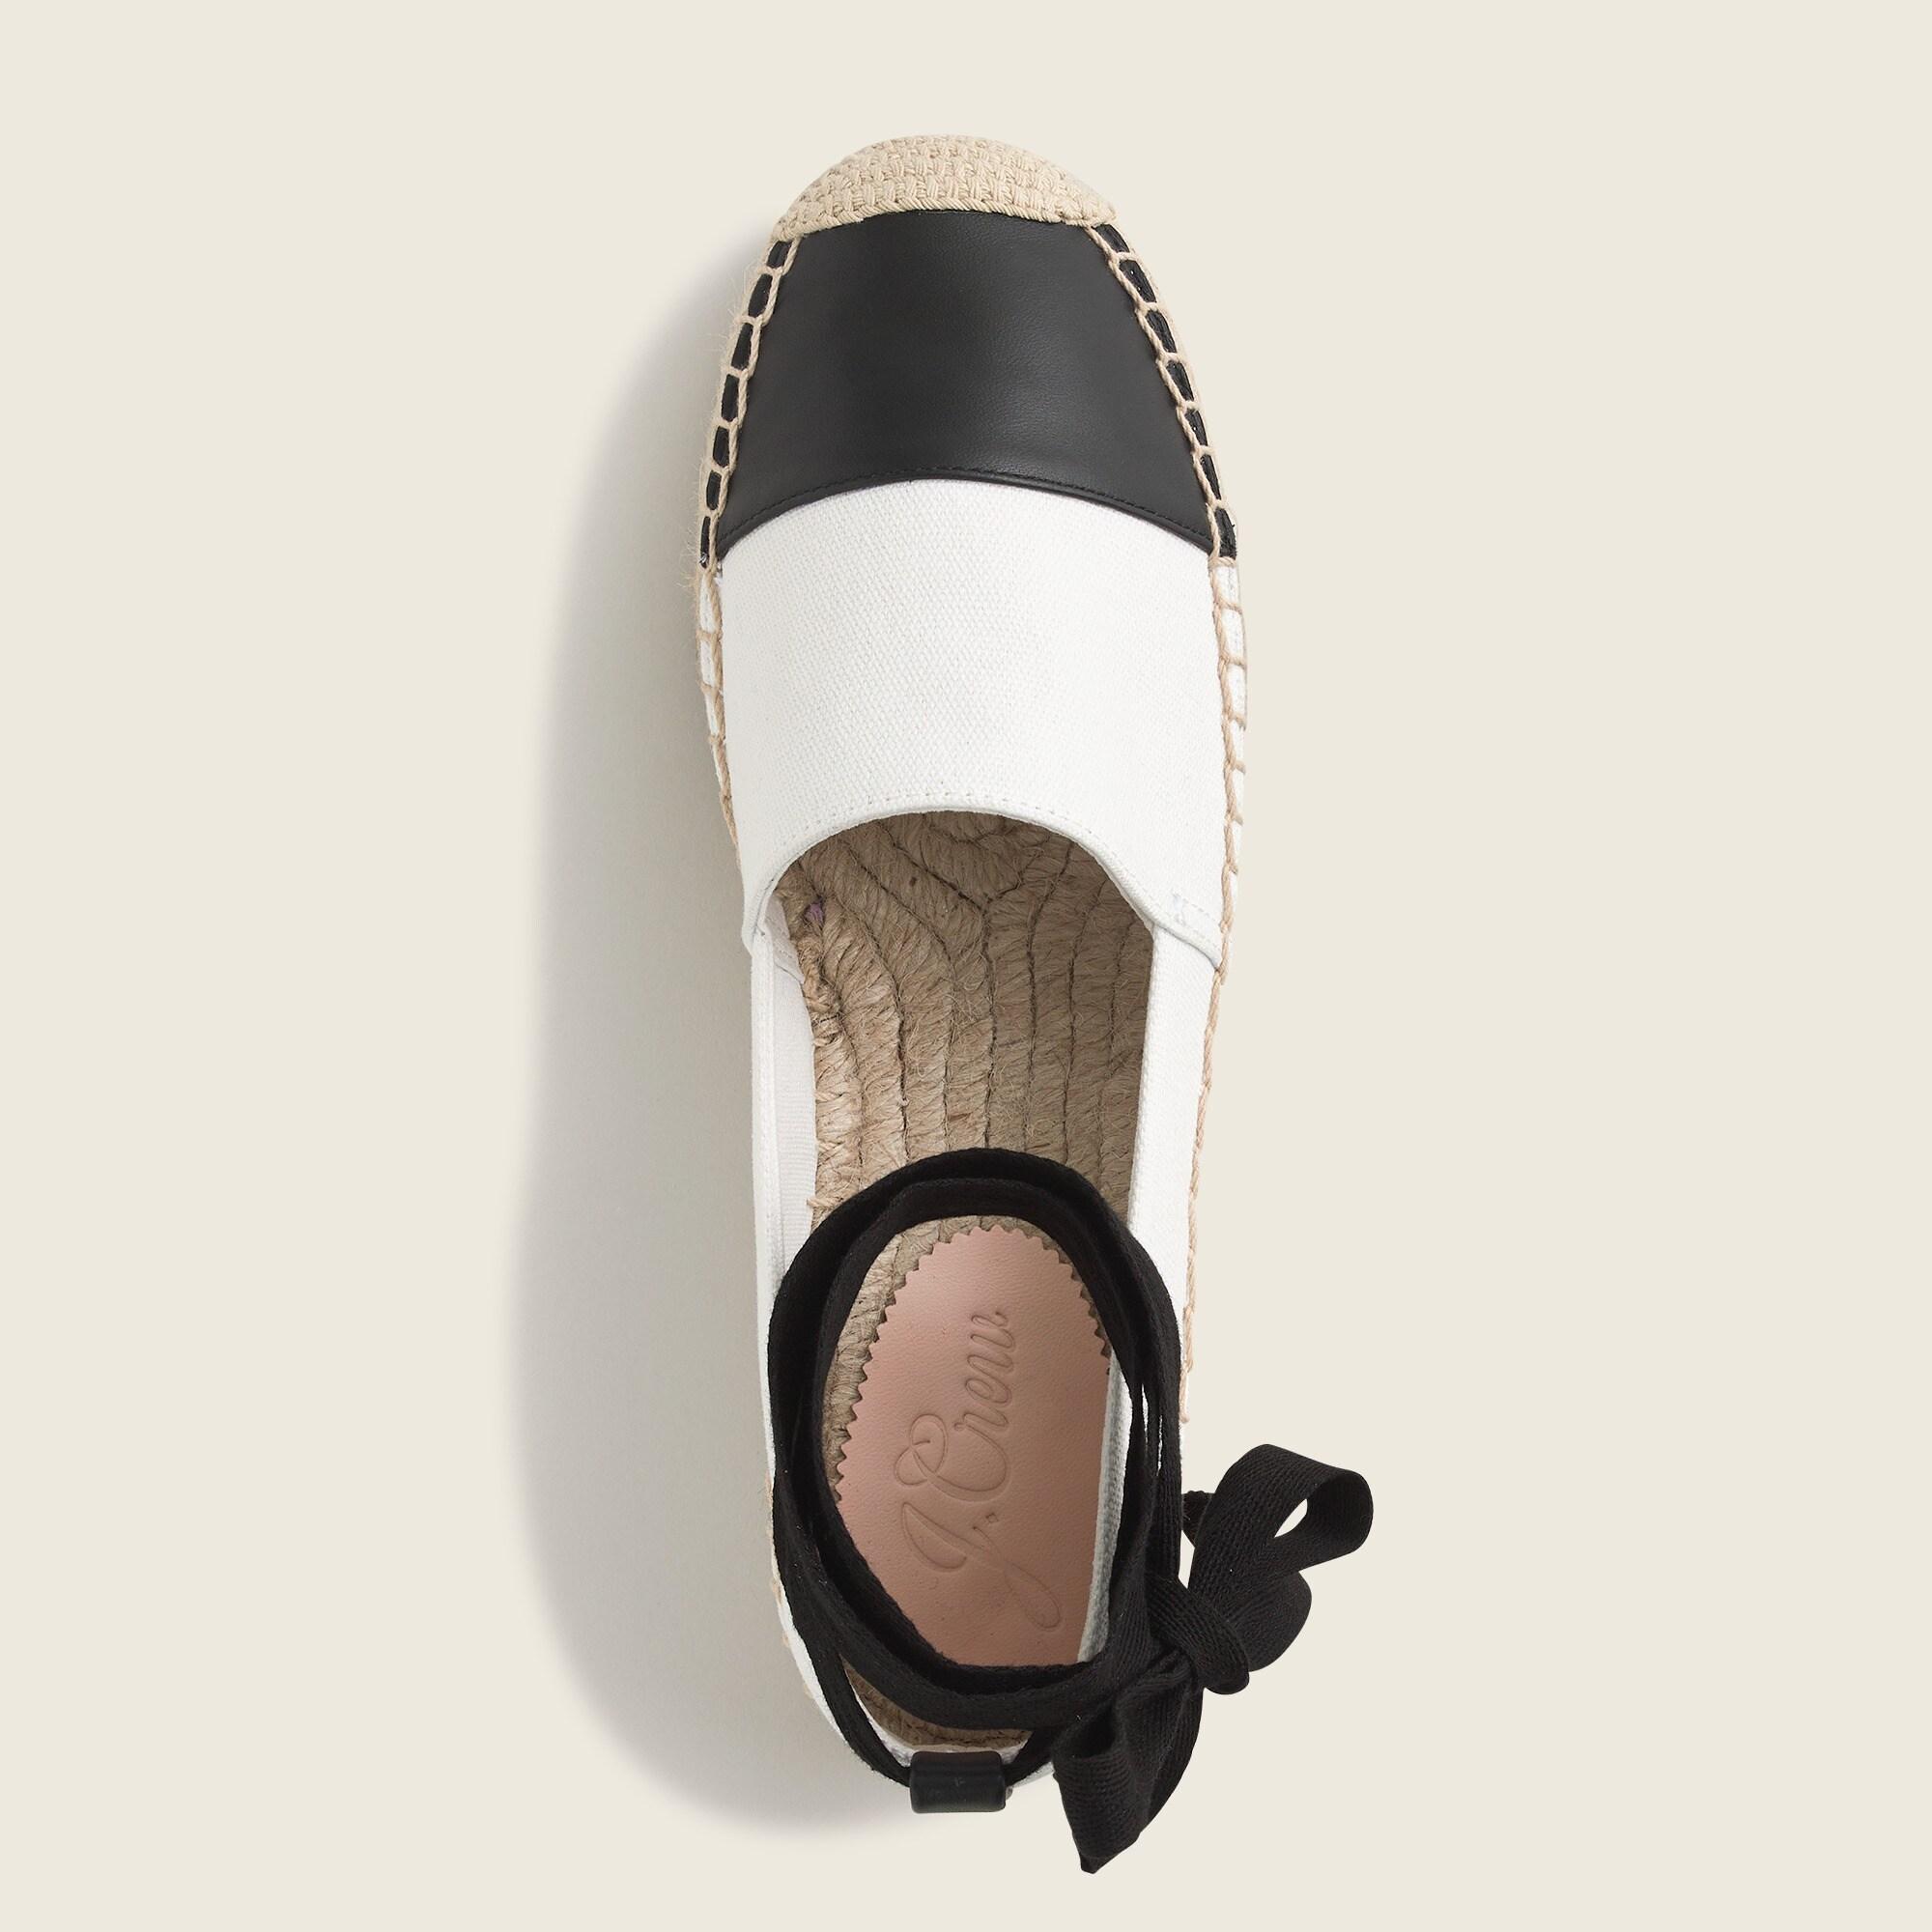 J.Crew Canvas Espadrille Flats With Leather Cap Toe in White